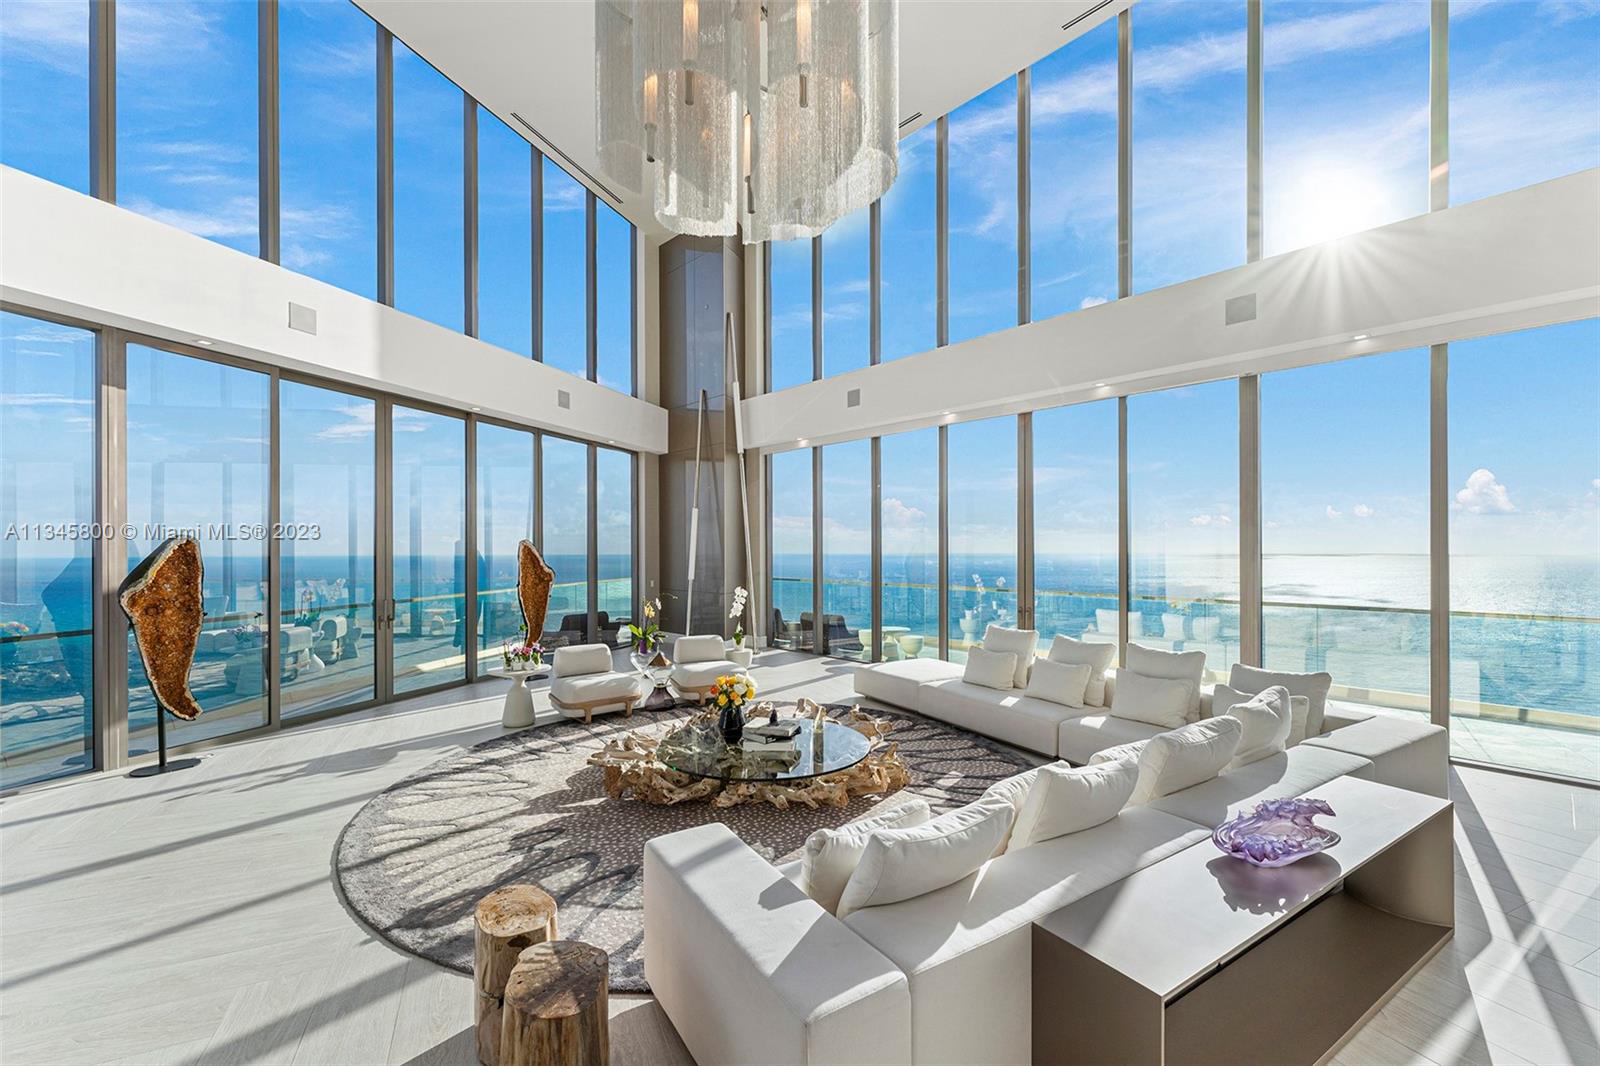 Residences by Armani Casa Armani Apt PH-00 For Sale in Sunny Isles Beach,  FL - Presented by Mark Zilbert on  - MLS A11345800